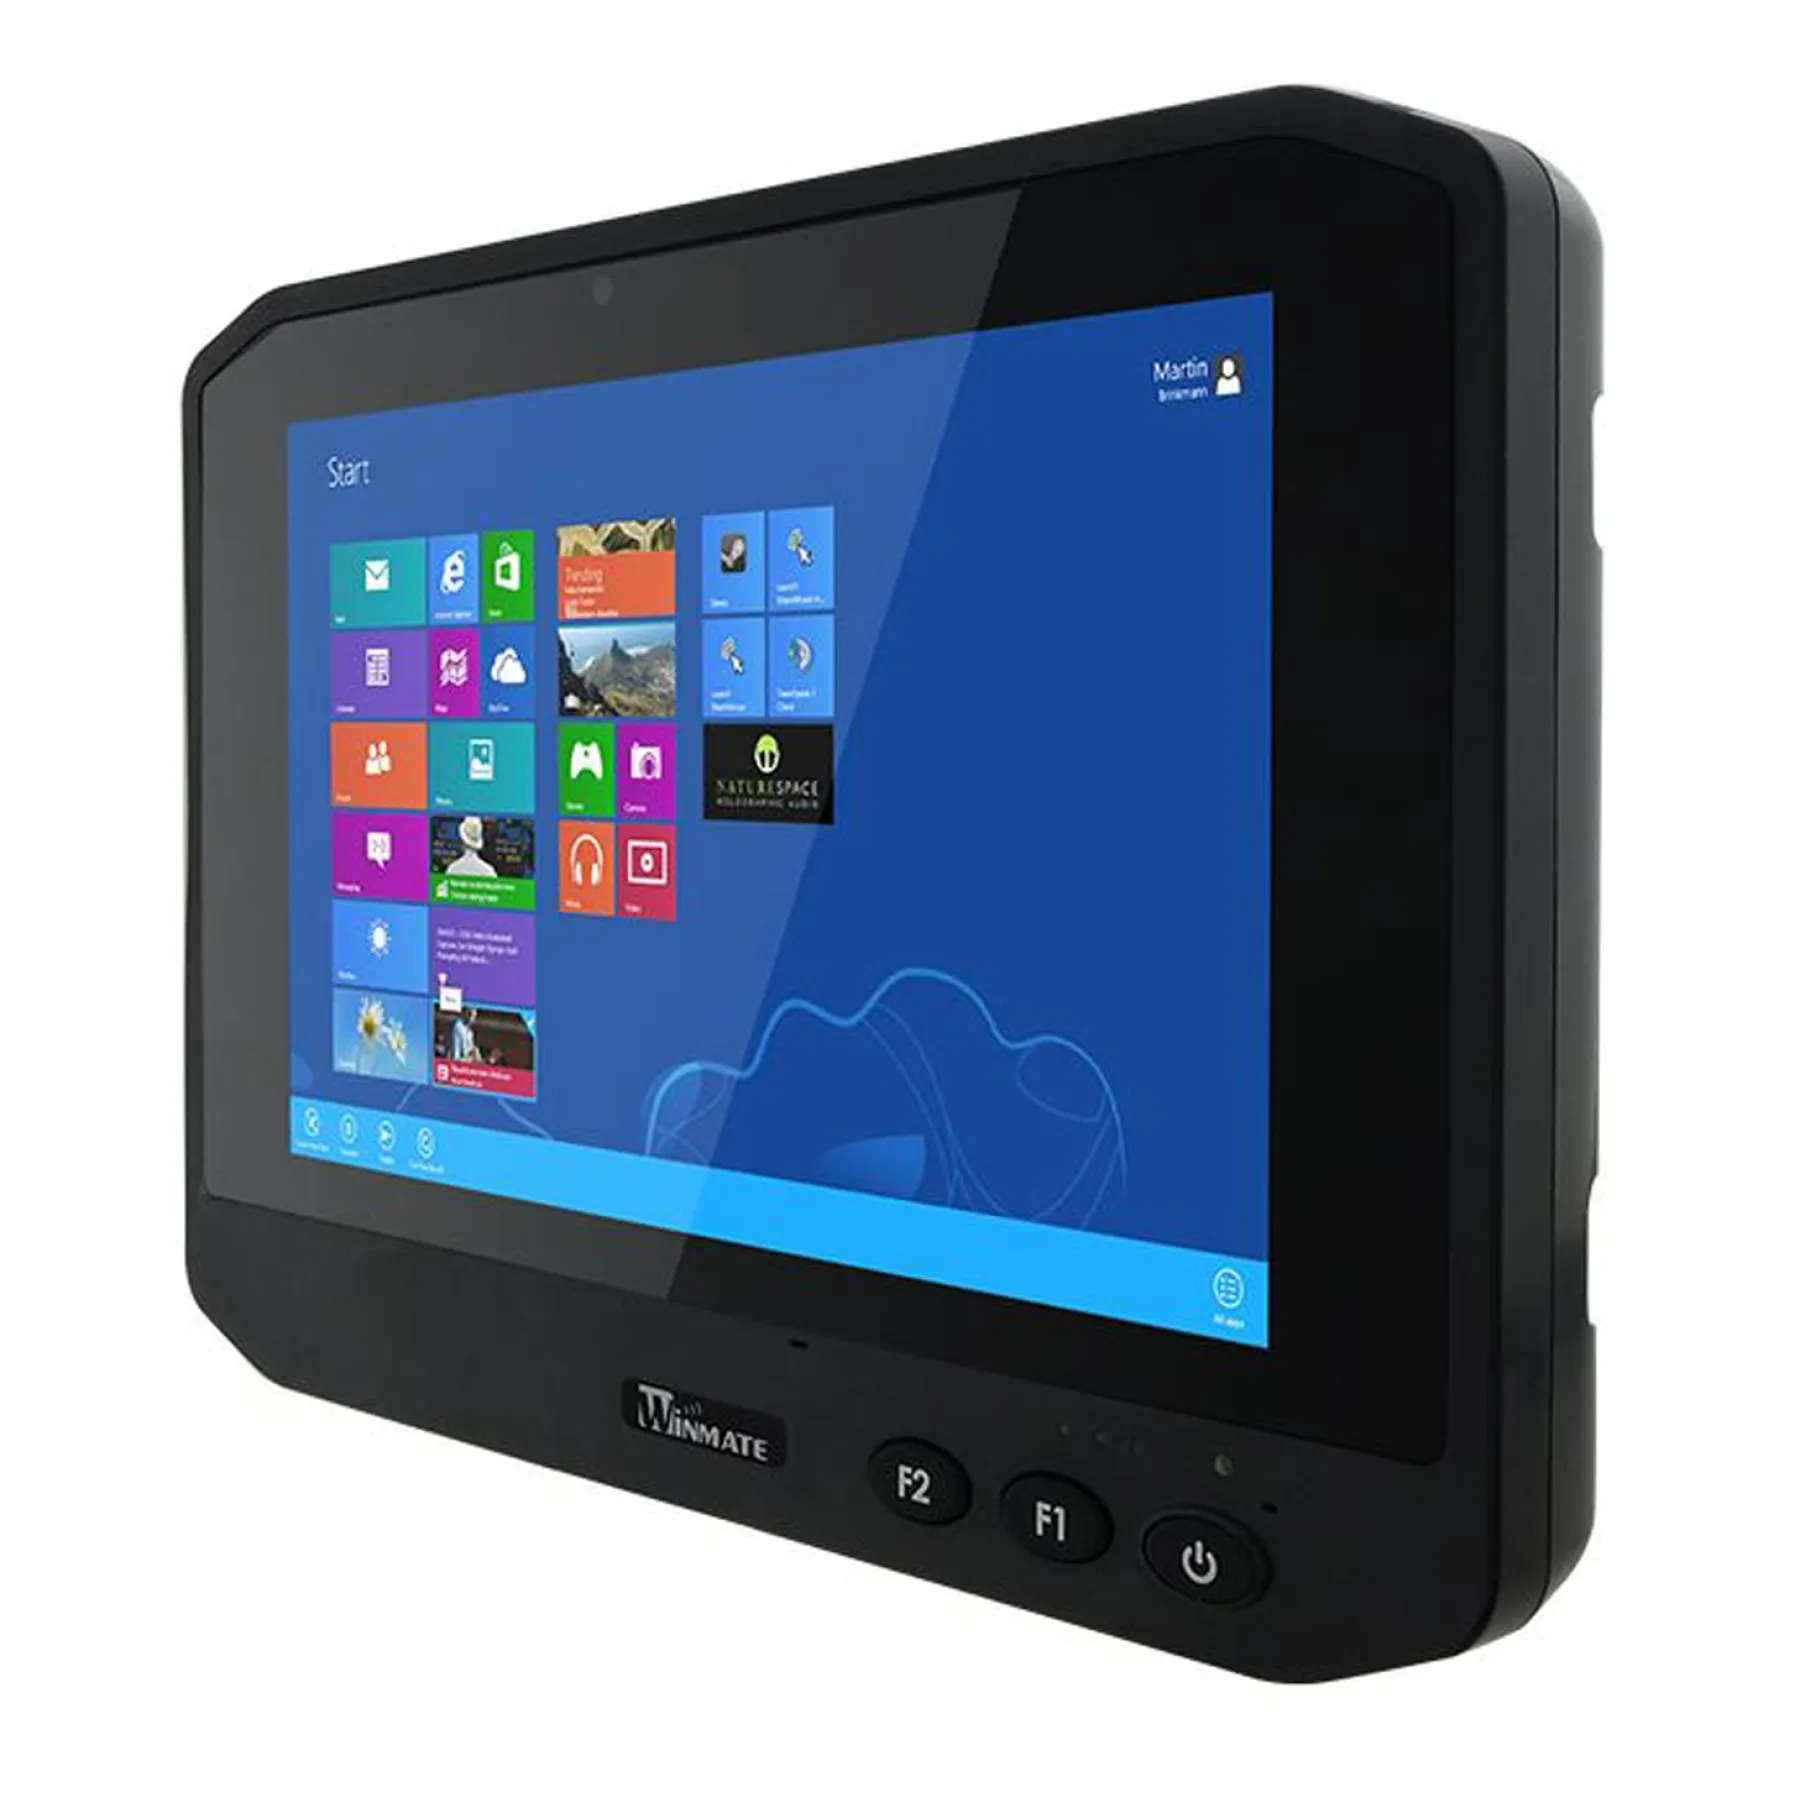 veiling Mysterieus vrije tijd Winmate 8 inch rugged mobile tablet with intel Celeron n3160 cpu